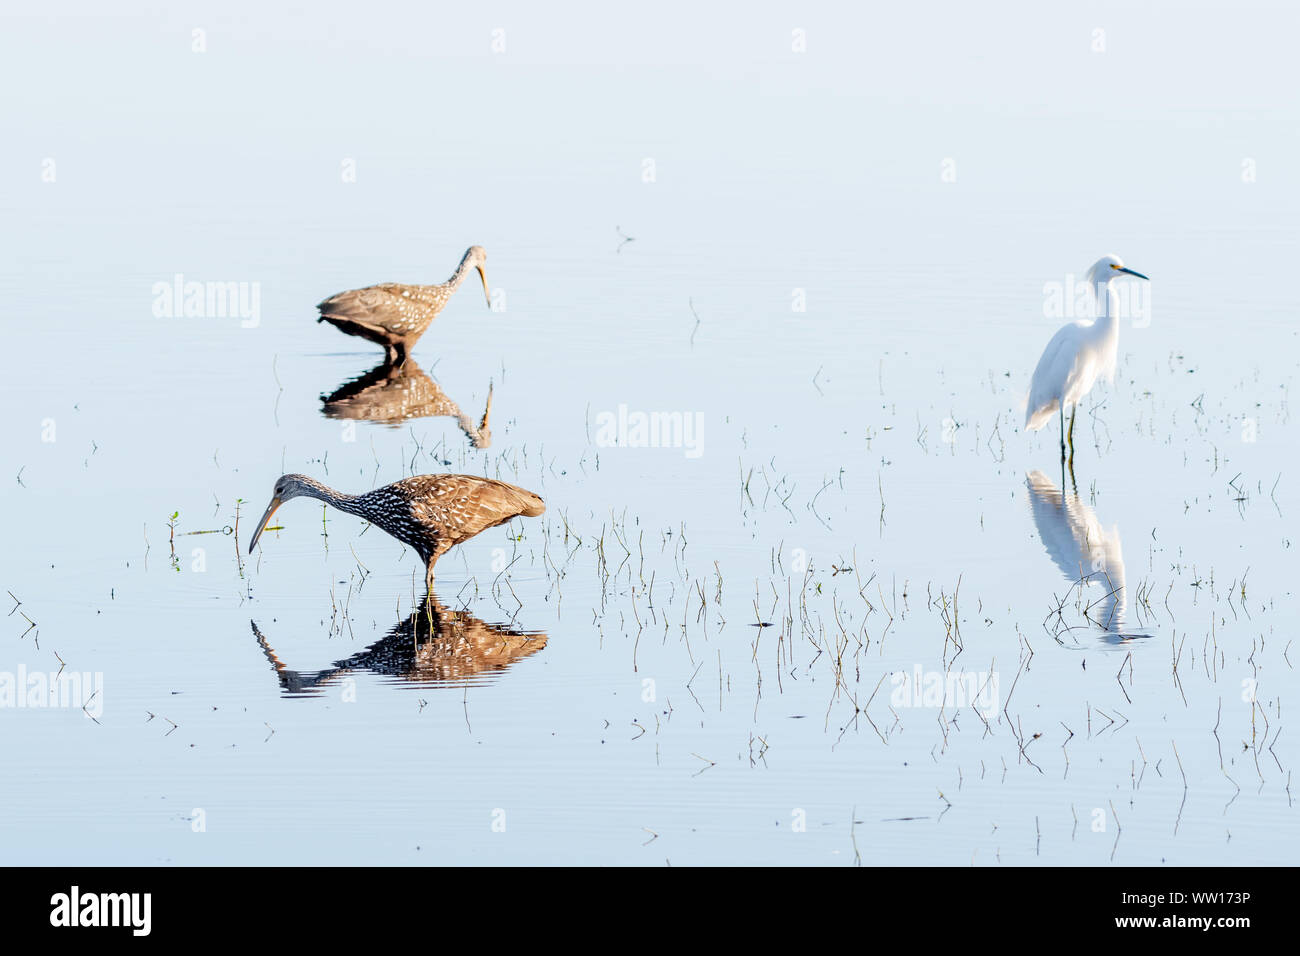 Limpkins and snowy egret wading in the water with reflections Stock Photo